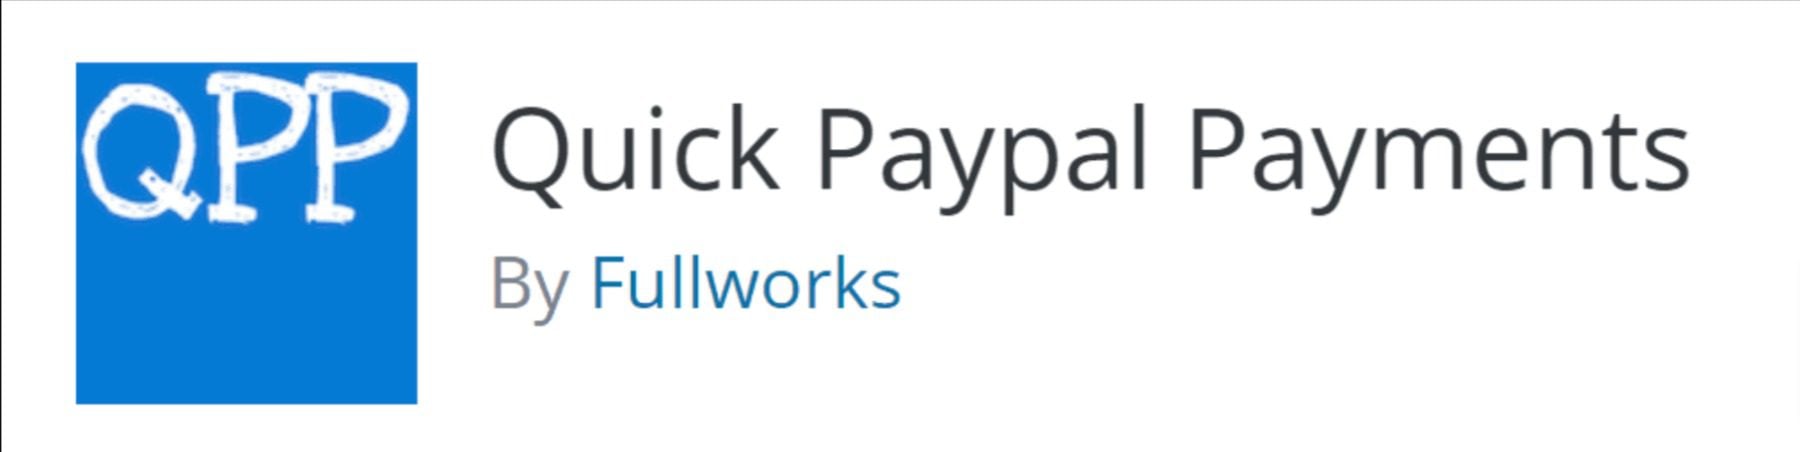 Quick PayPal Payments